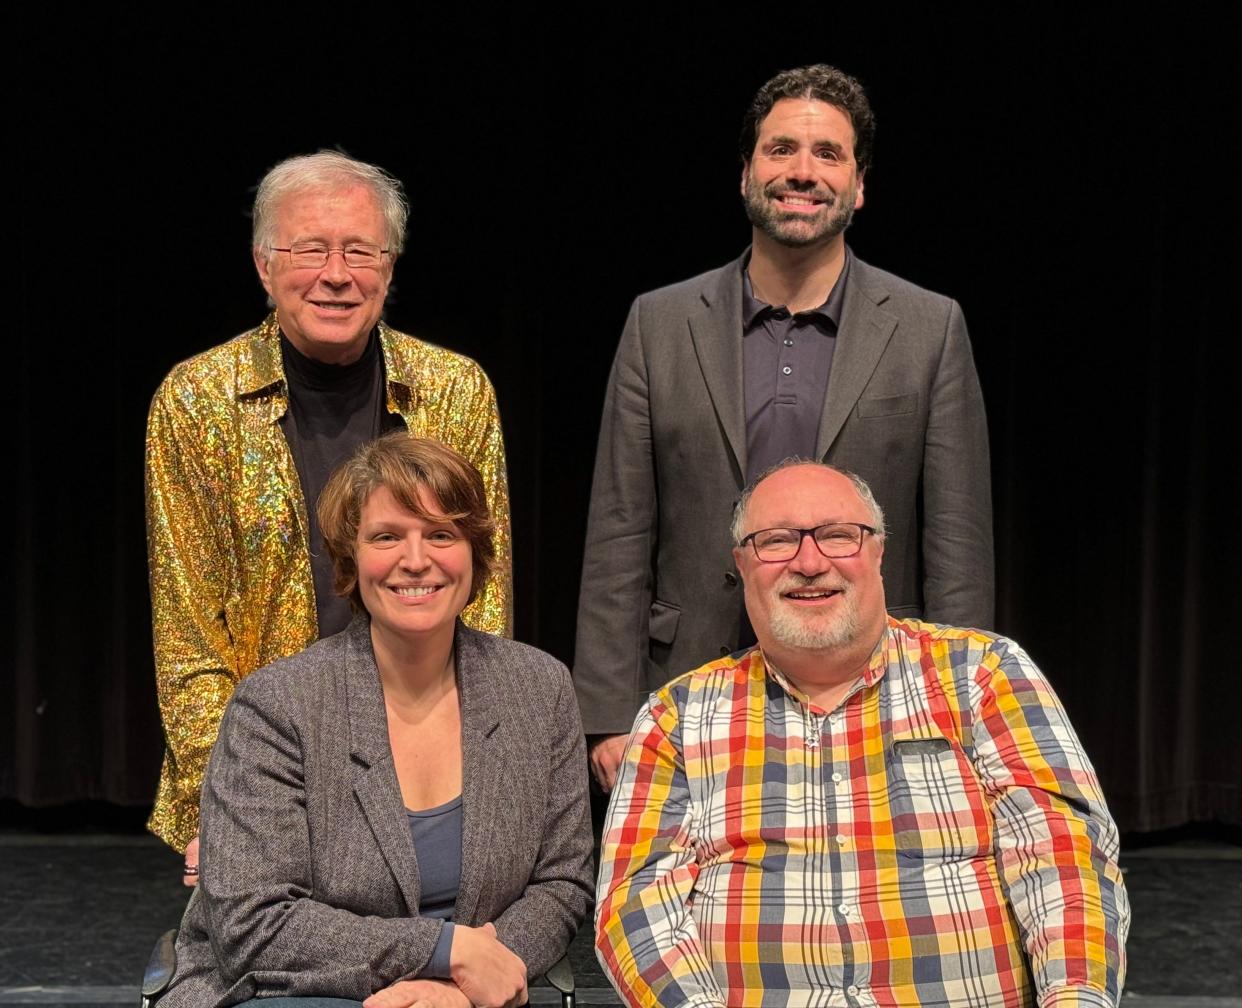 Left to right: Mark Schwamberger (top rear), Alyssa Ryan (sitting), Joe Bishara (top right) and Robert Cooperman (sitting right), leaders of the Abbey Theater's resident companies